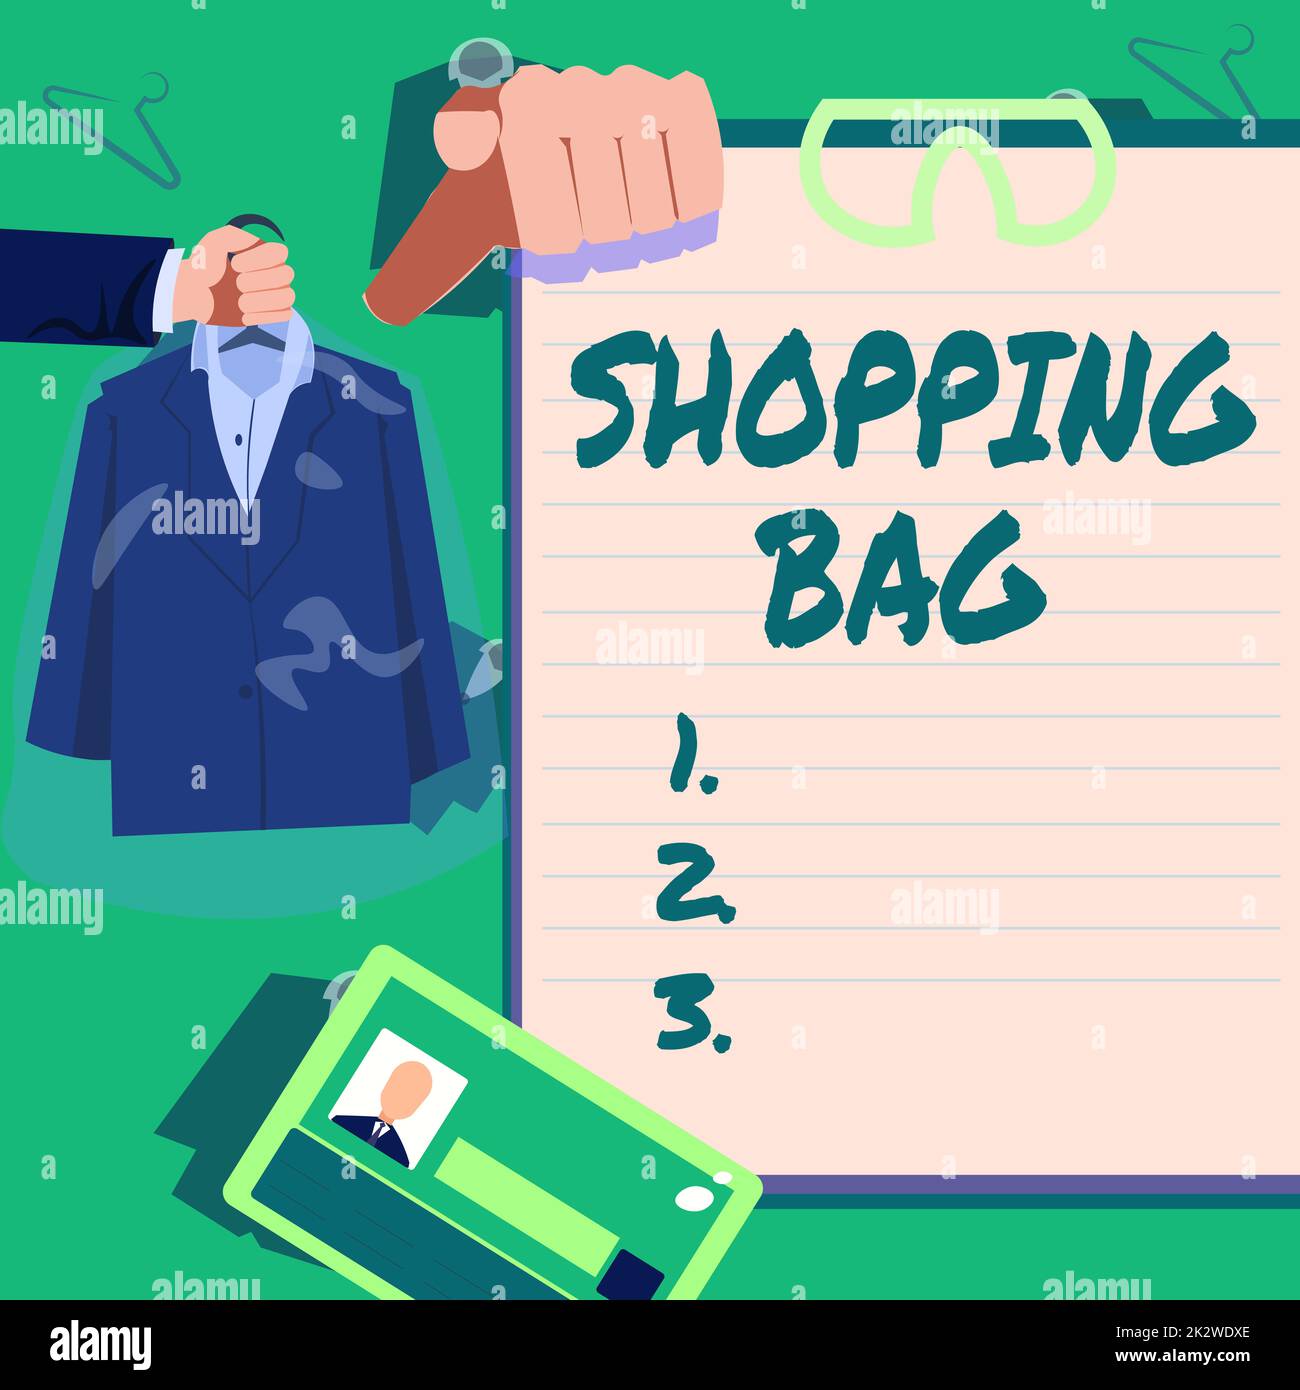 Text showing inspiration Shopping Bag. Business concept Containers for carrying personal possessions or purchases Hands Holding Uniform Showing New Open Career Opportunities. Stock Photo